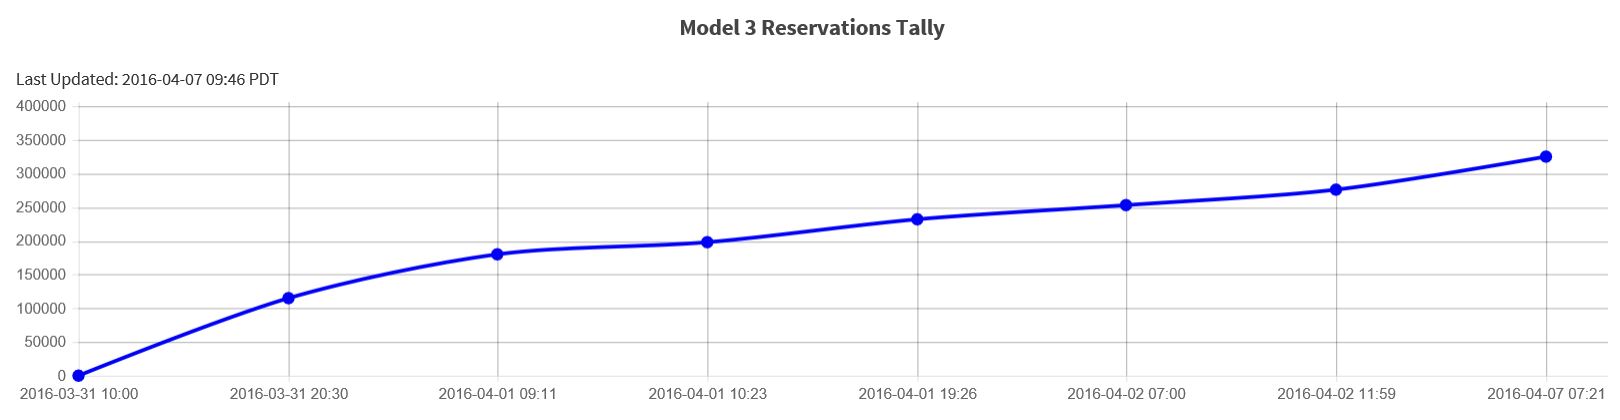 model 3 reservations tally